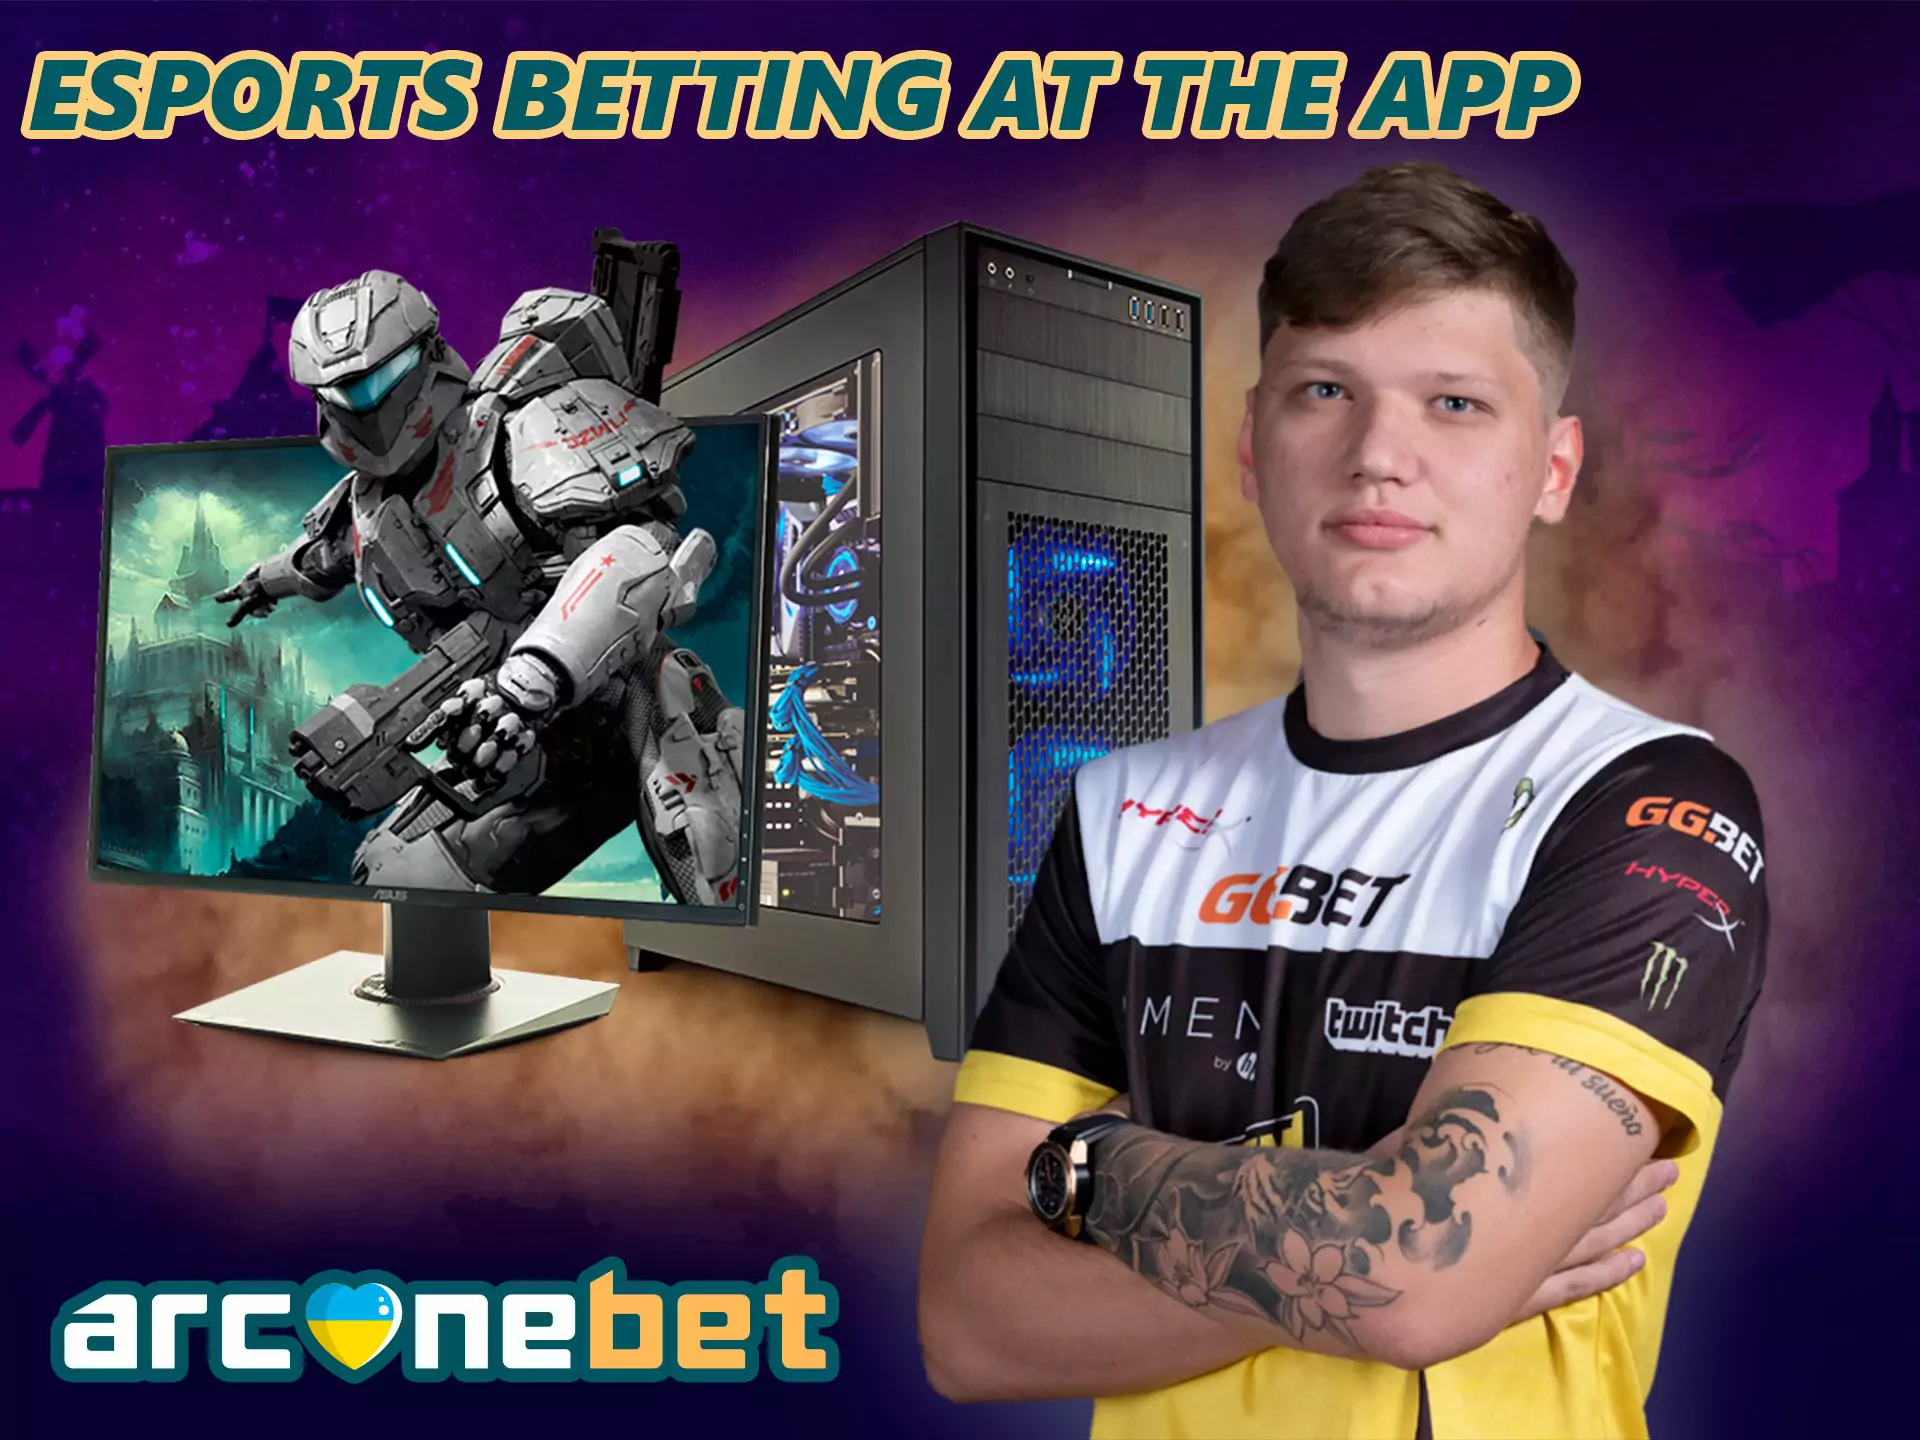 This type of bet is very important for the industry, every year it grows more and more, the number of games is constantly growing, here users can bet on the outcomes of all the most popular gaming disciplines at the moment.